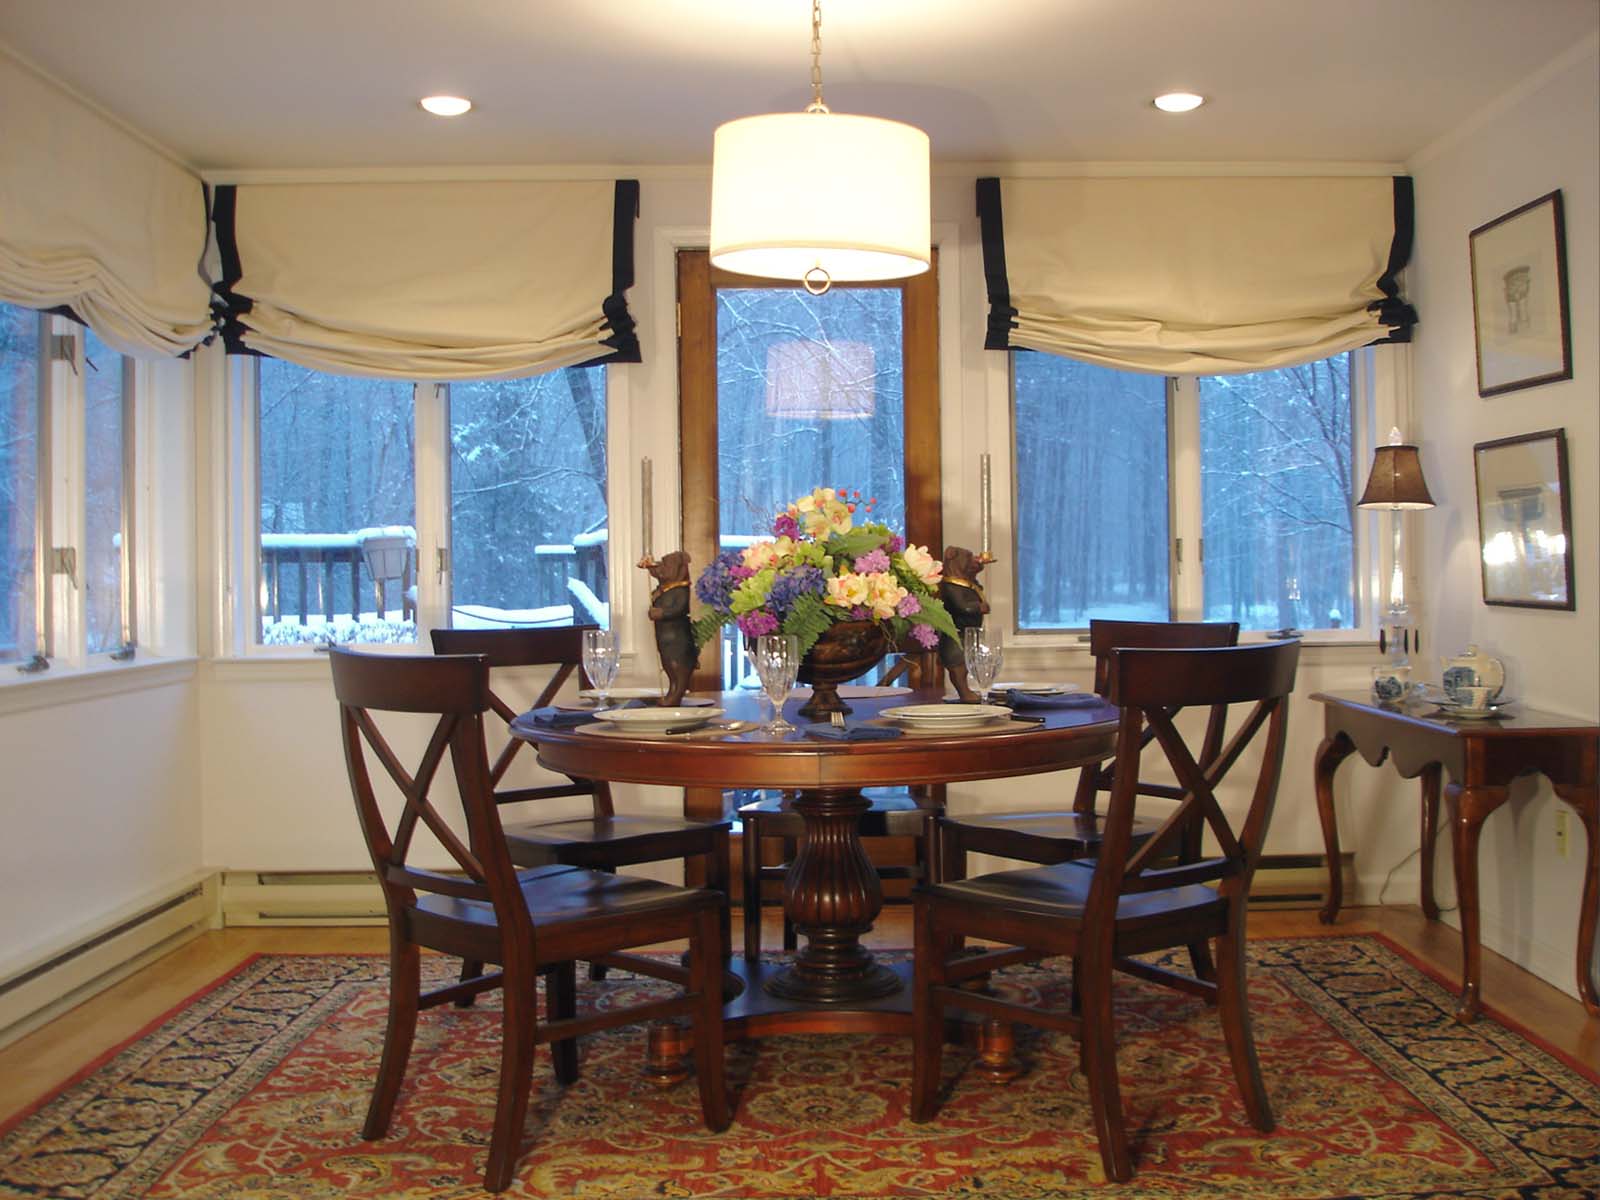 207 Old forge dining room.JPG